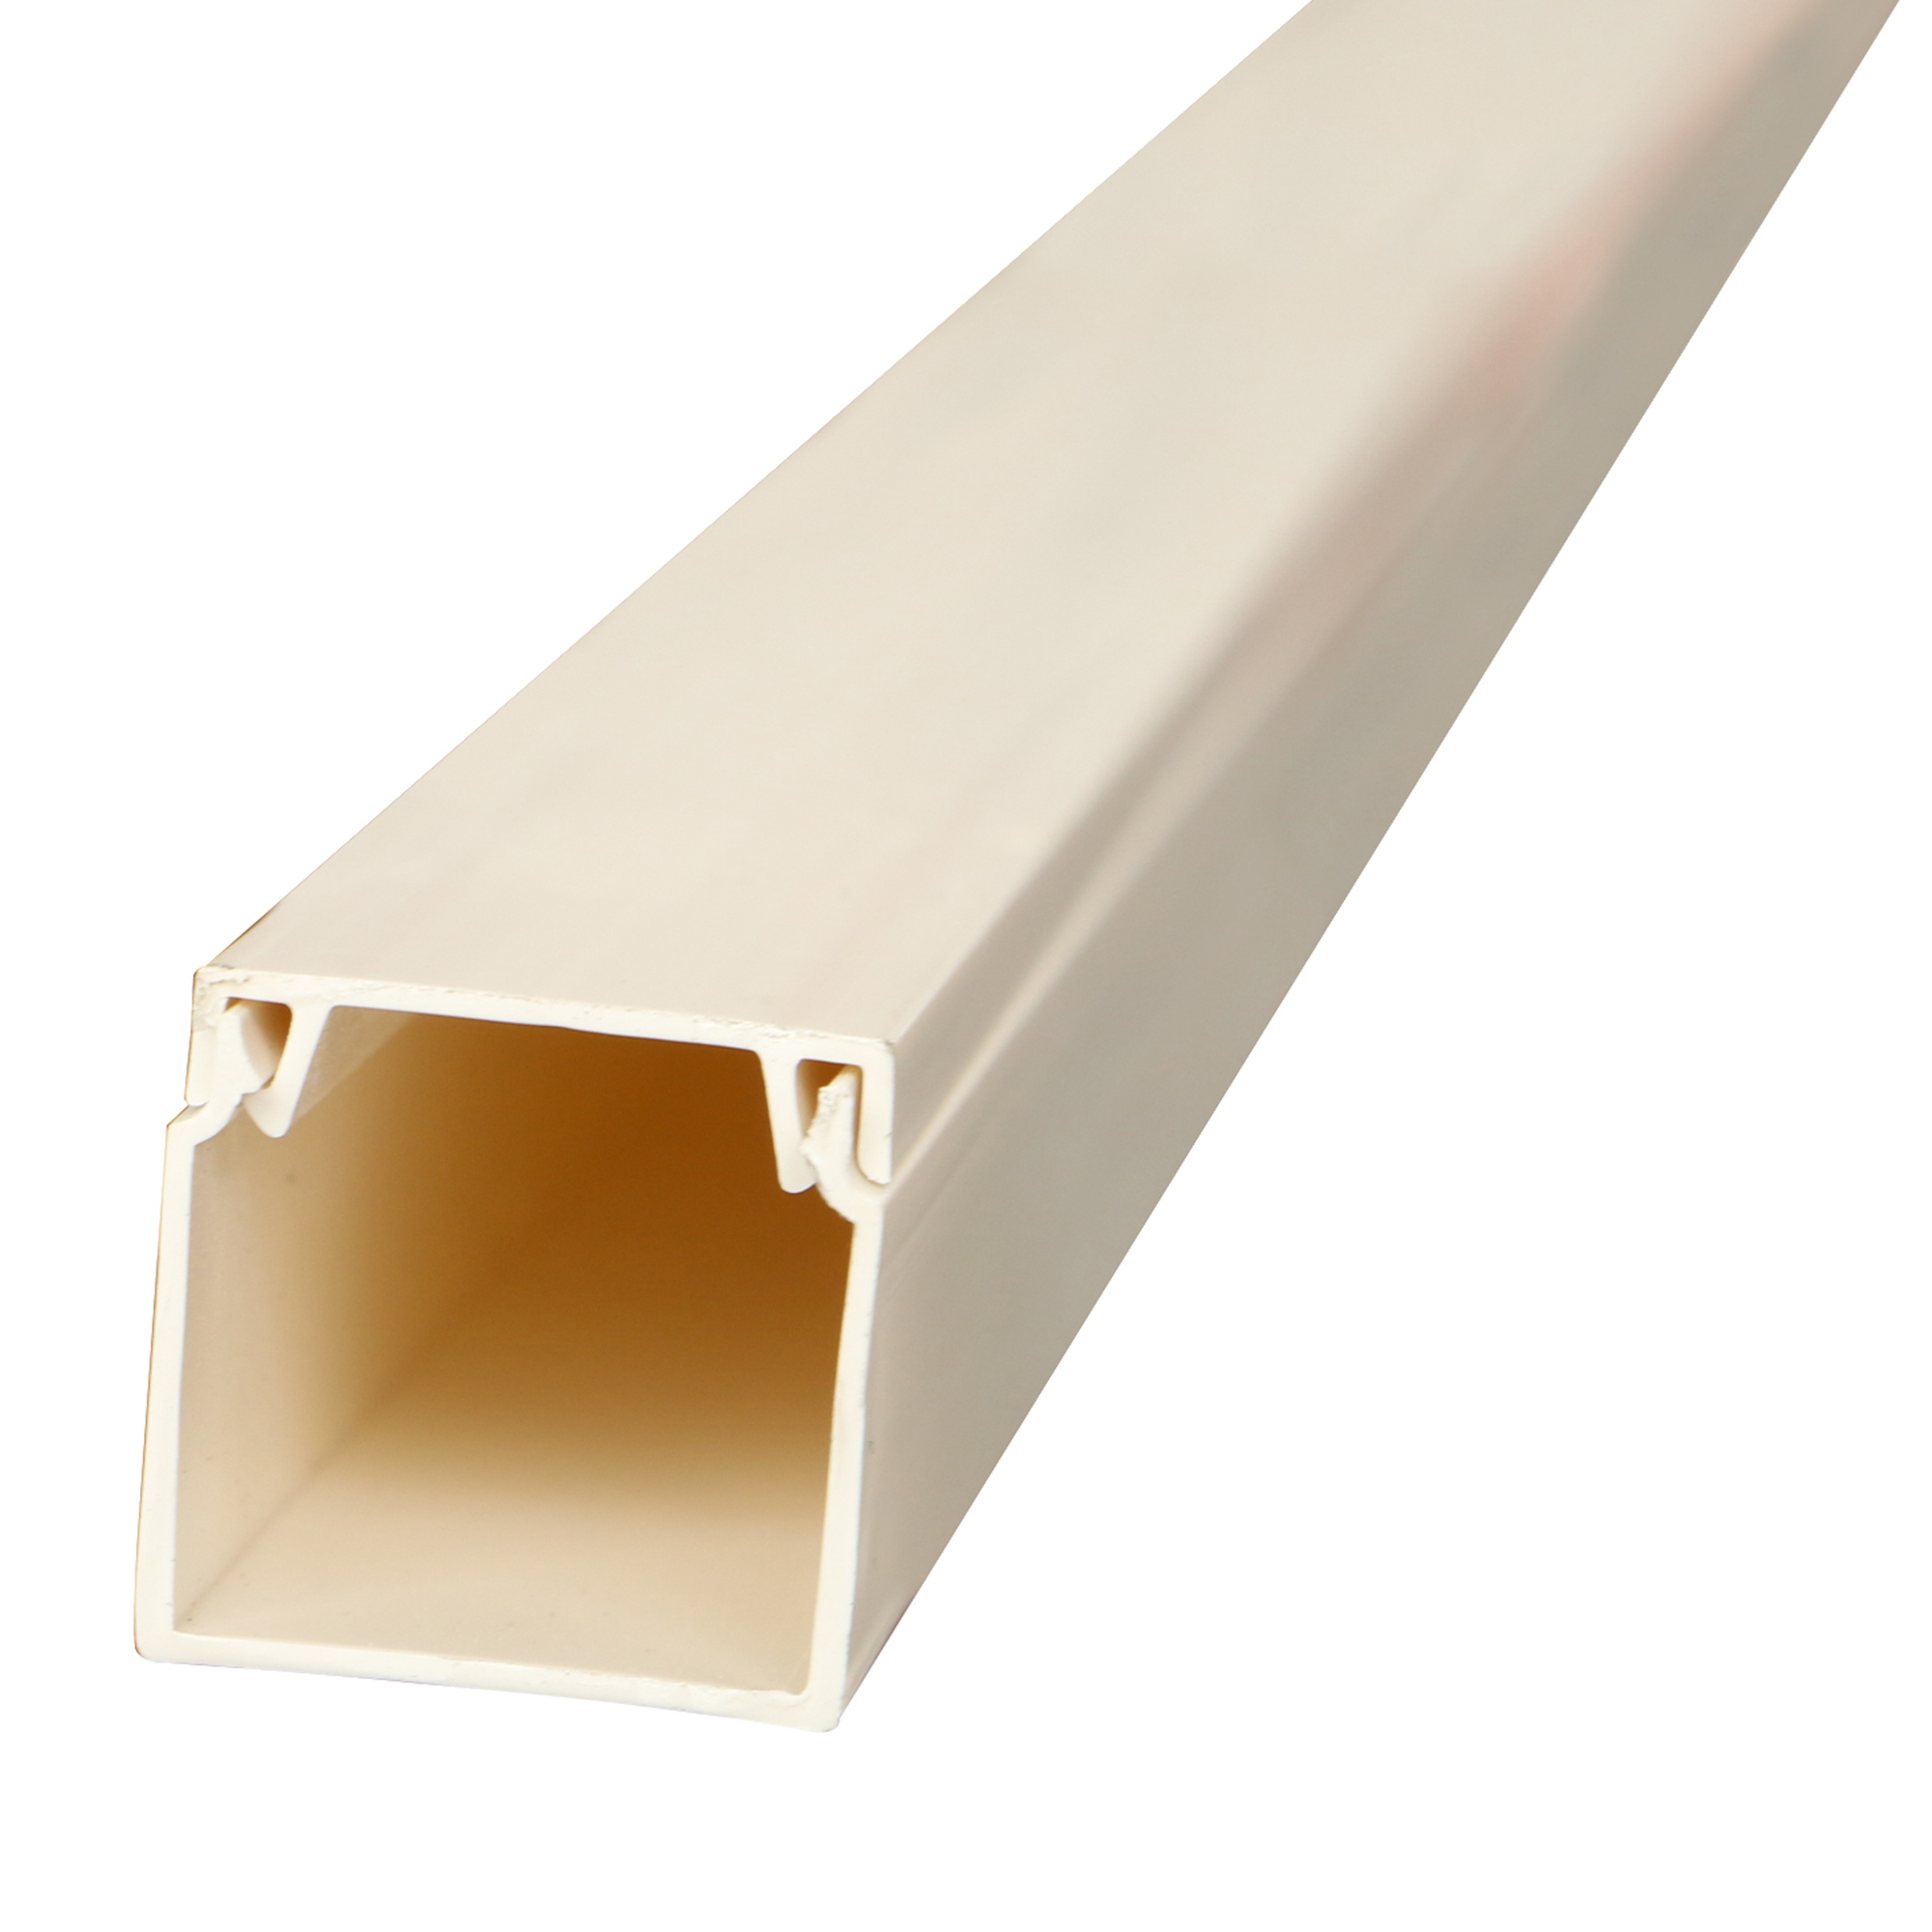 25 mm x 25 mm x 4 m White Duct